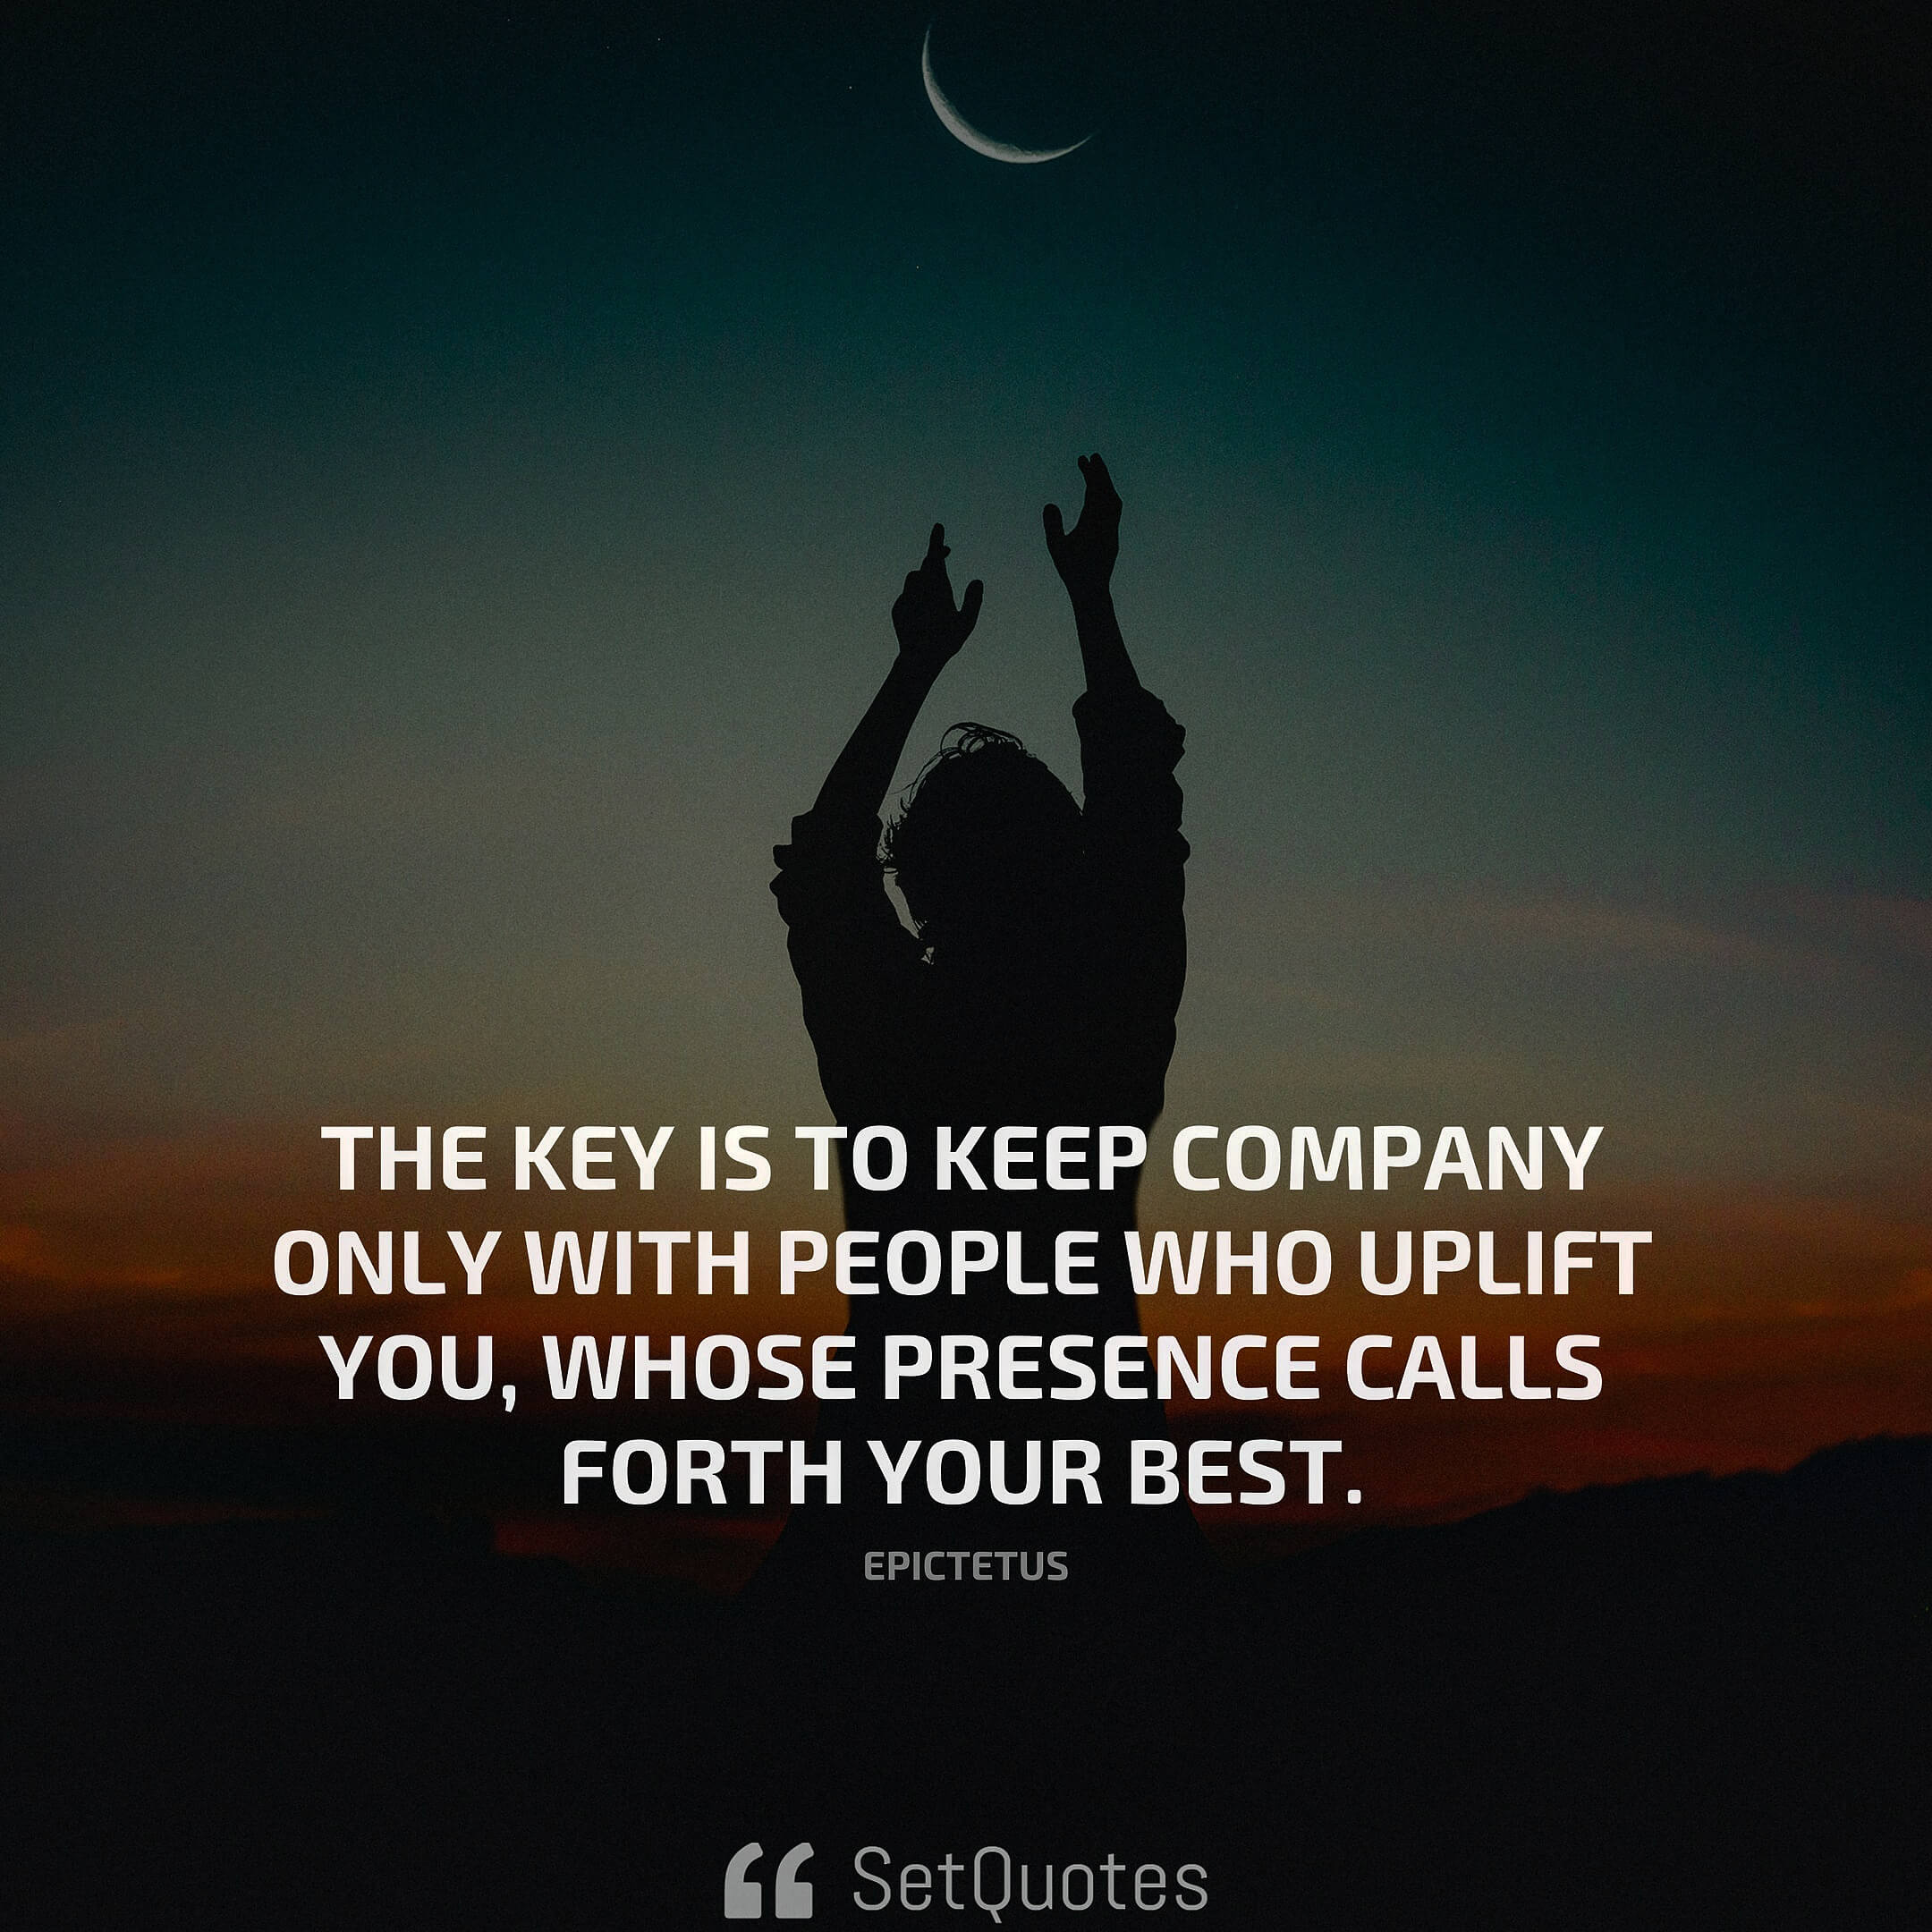 The key is to keep company only with people who uplift you, whose presence calls forth your best. - Epictetus